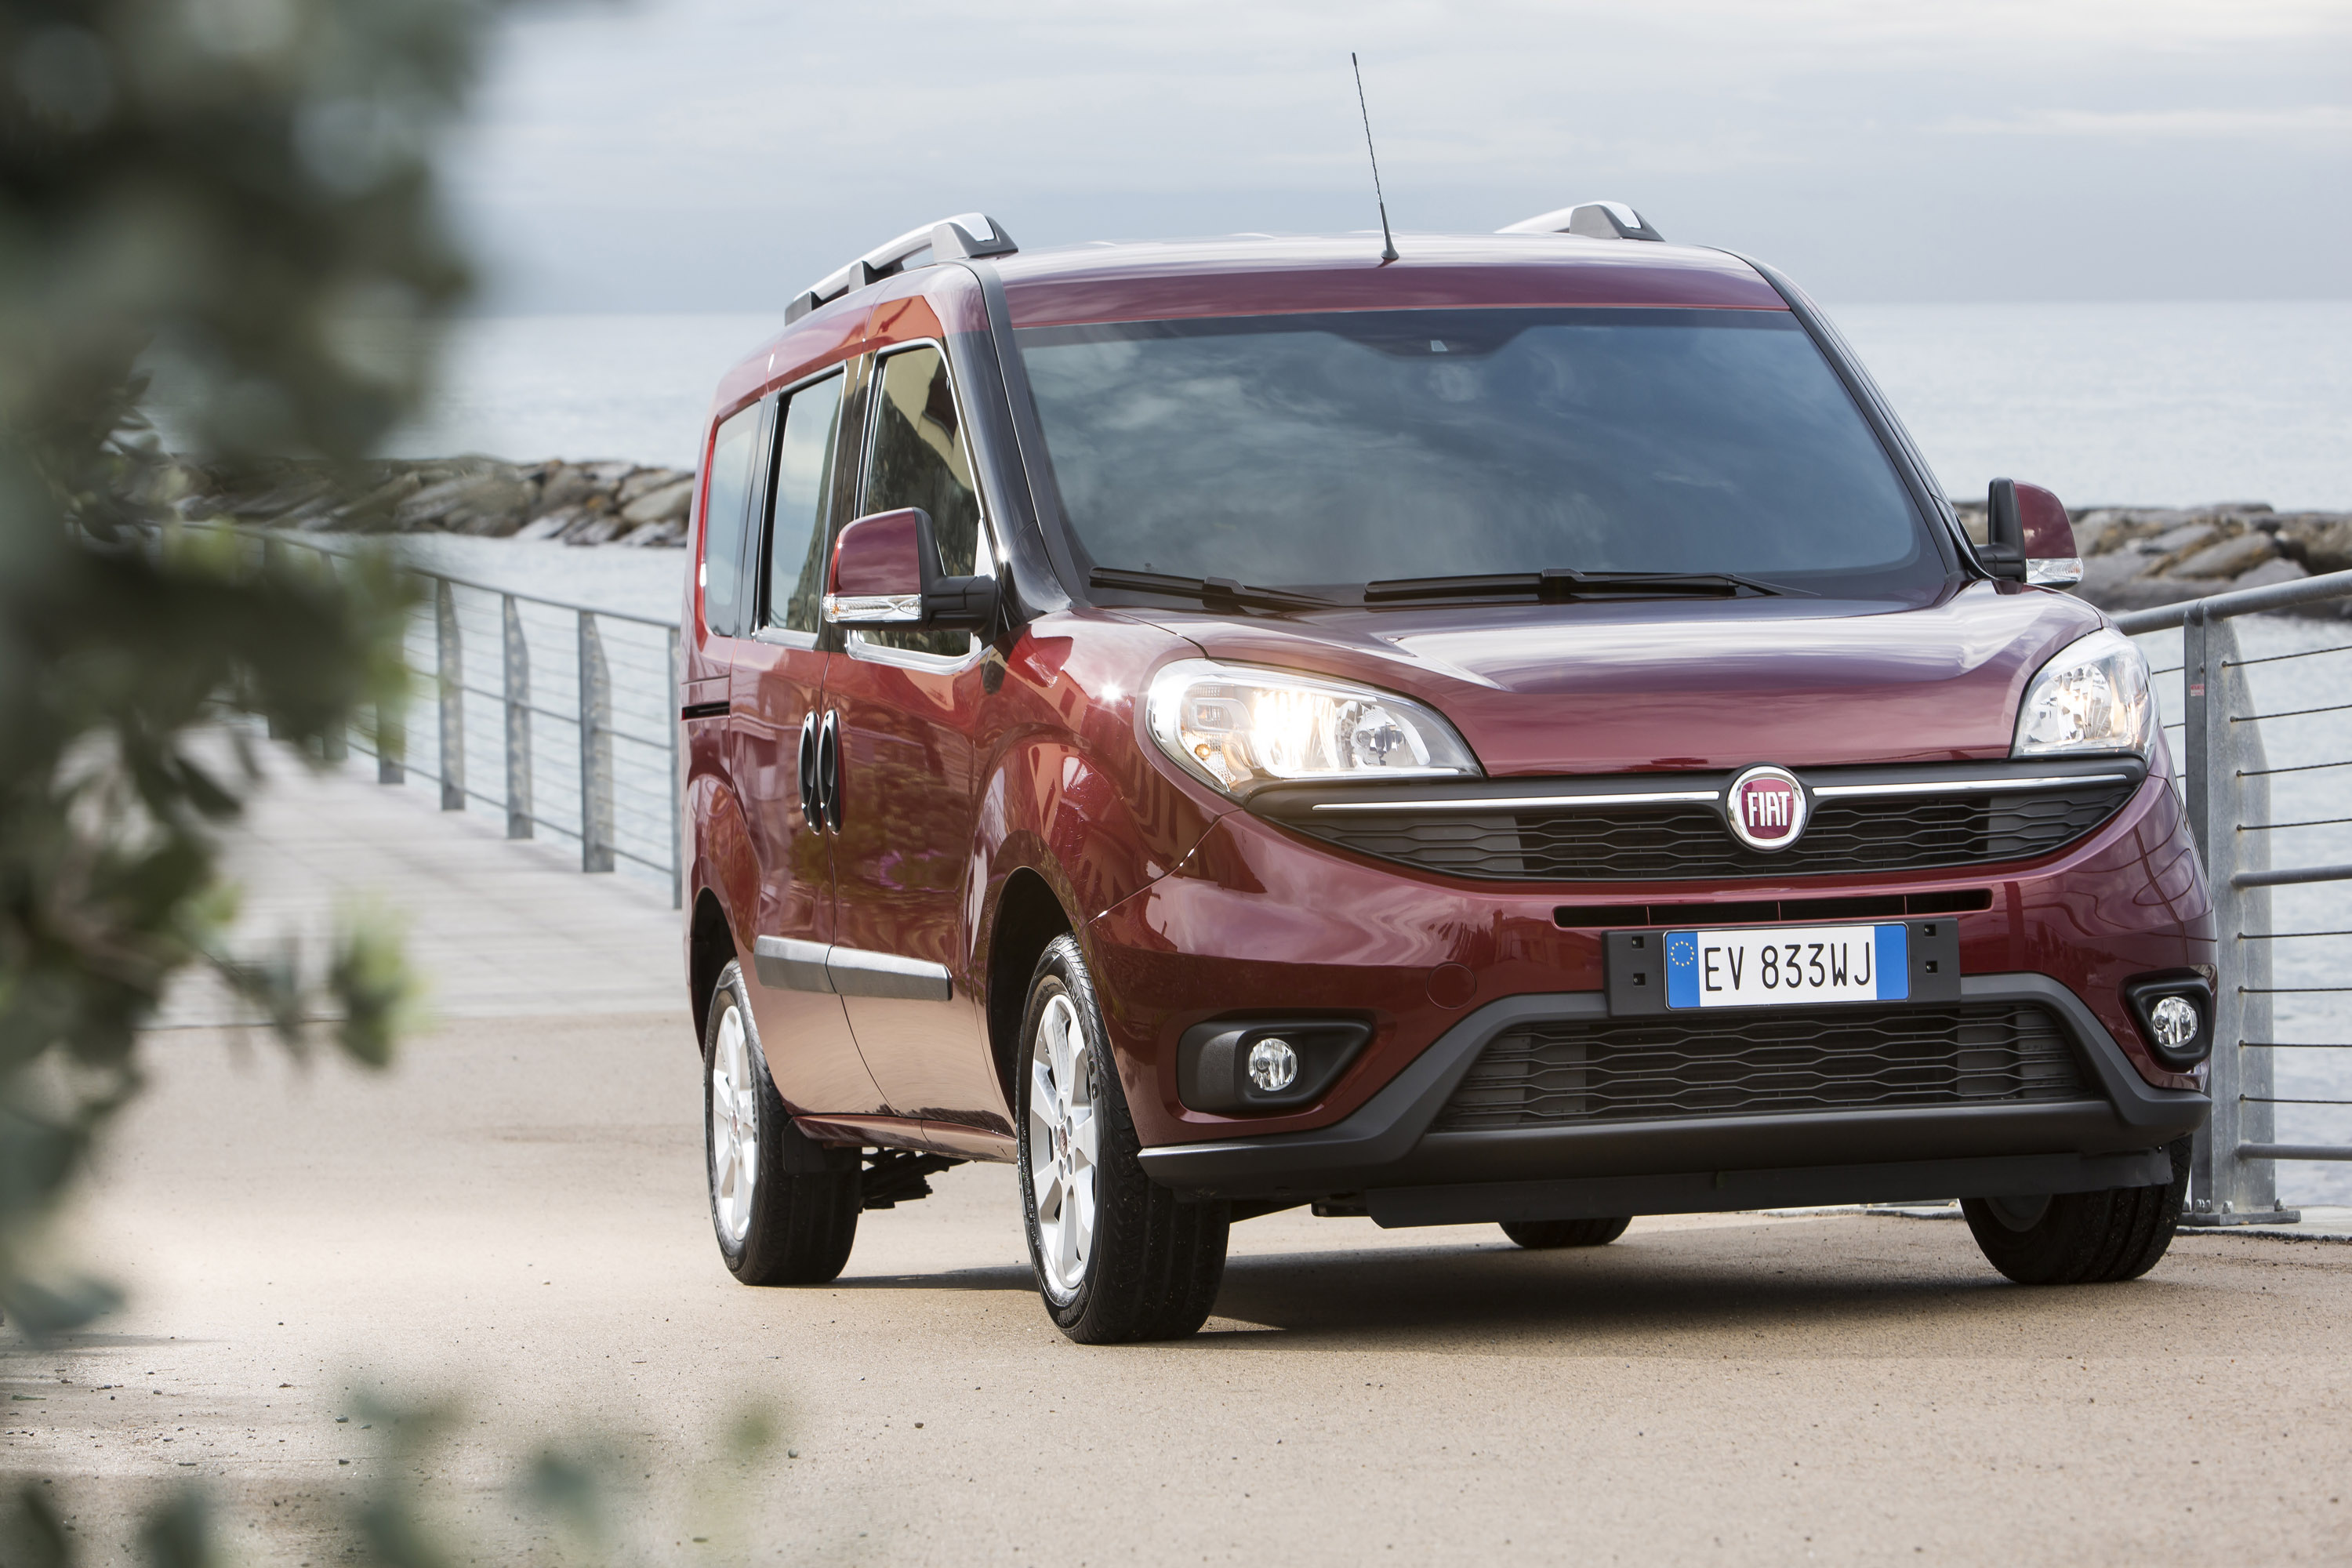 The New Fiat Doblo Inherits Old Ugly Proportions